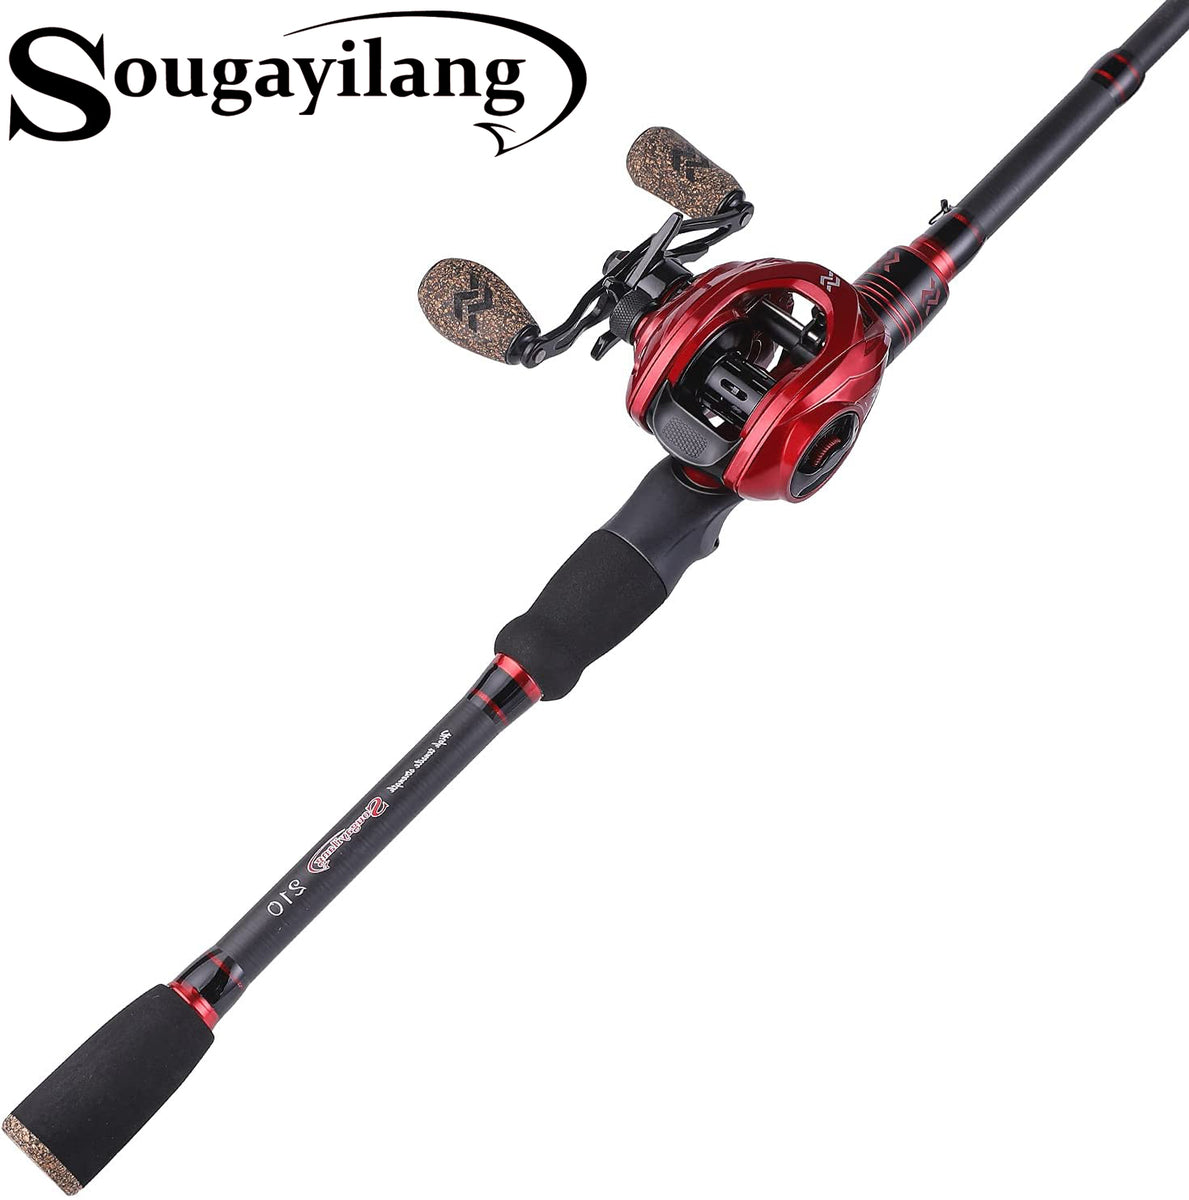 Sougayilang Baitcaster Combo Telescopic Fishing Rod and Reel Combo, Ultra  Light Baitcasting Fishing Reel for Travel Saltwater Freshwater with  Lures-6.9FT & Left Handle Reel with Bag, Rod & Reel Combos 